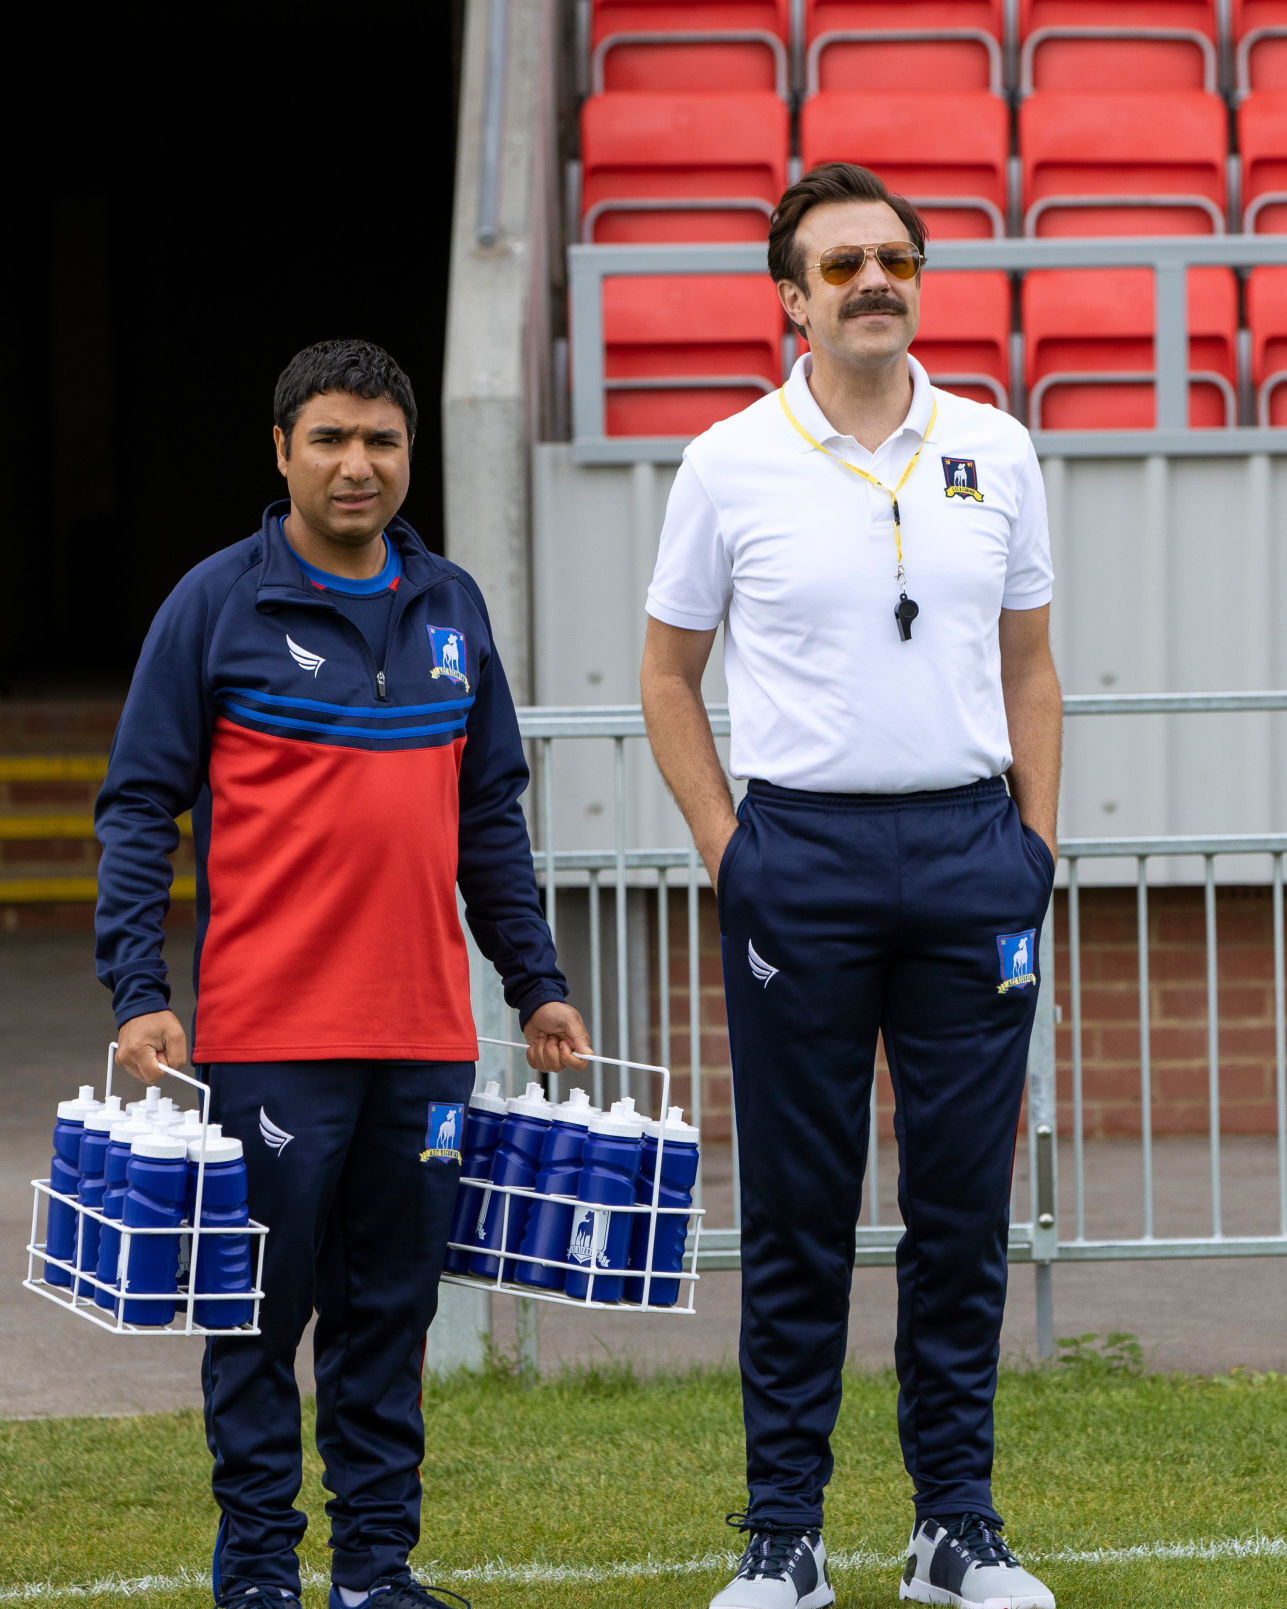 American hopes to charm Brits in soccer series Ted Lasso News cecildaily picture photo